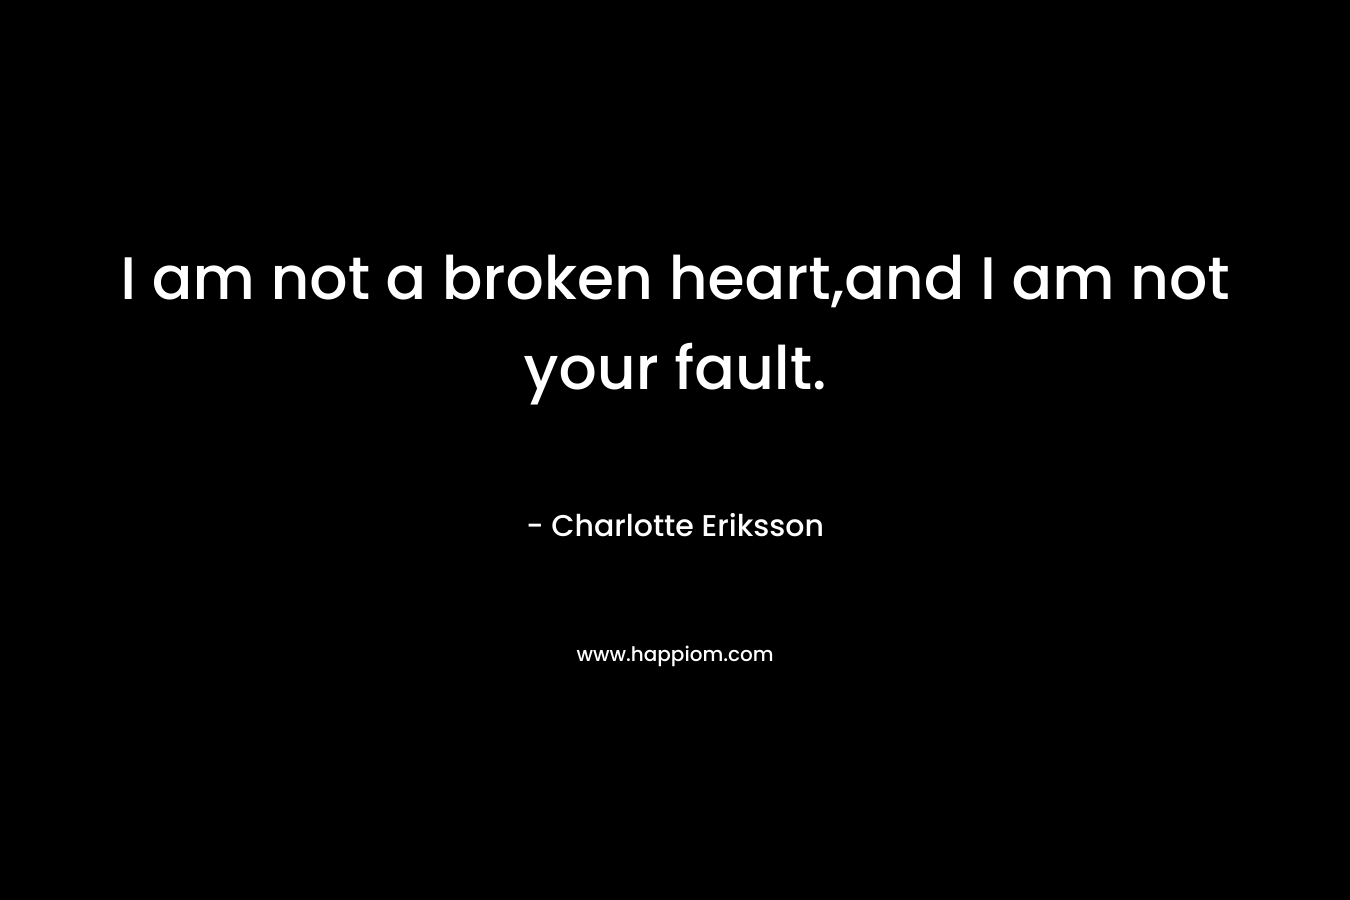 I am not a broken heart,and I am not your fault. – Charlotte Eriksson